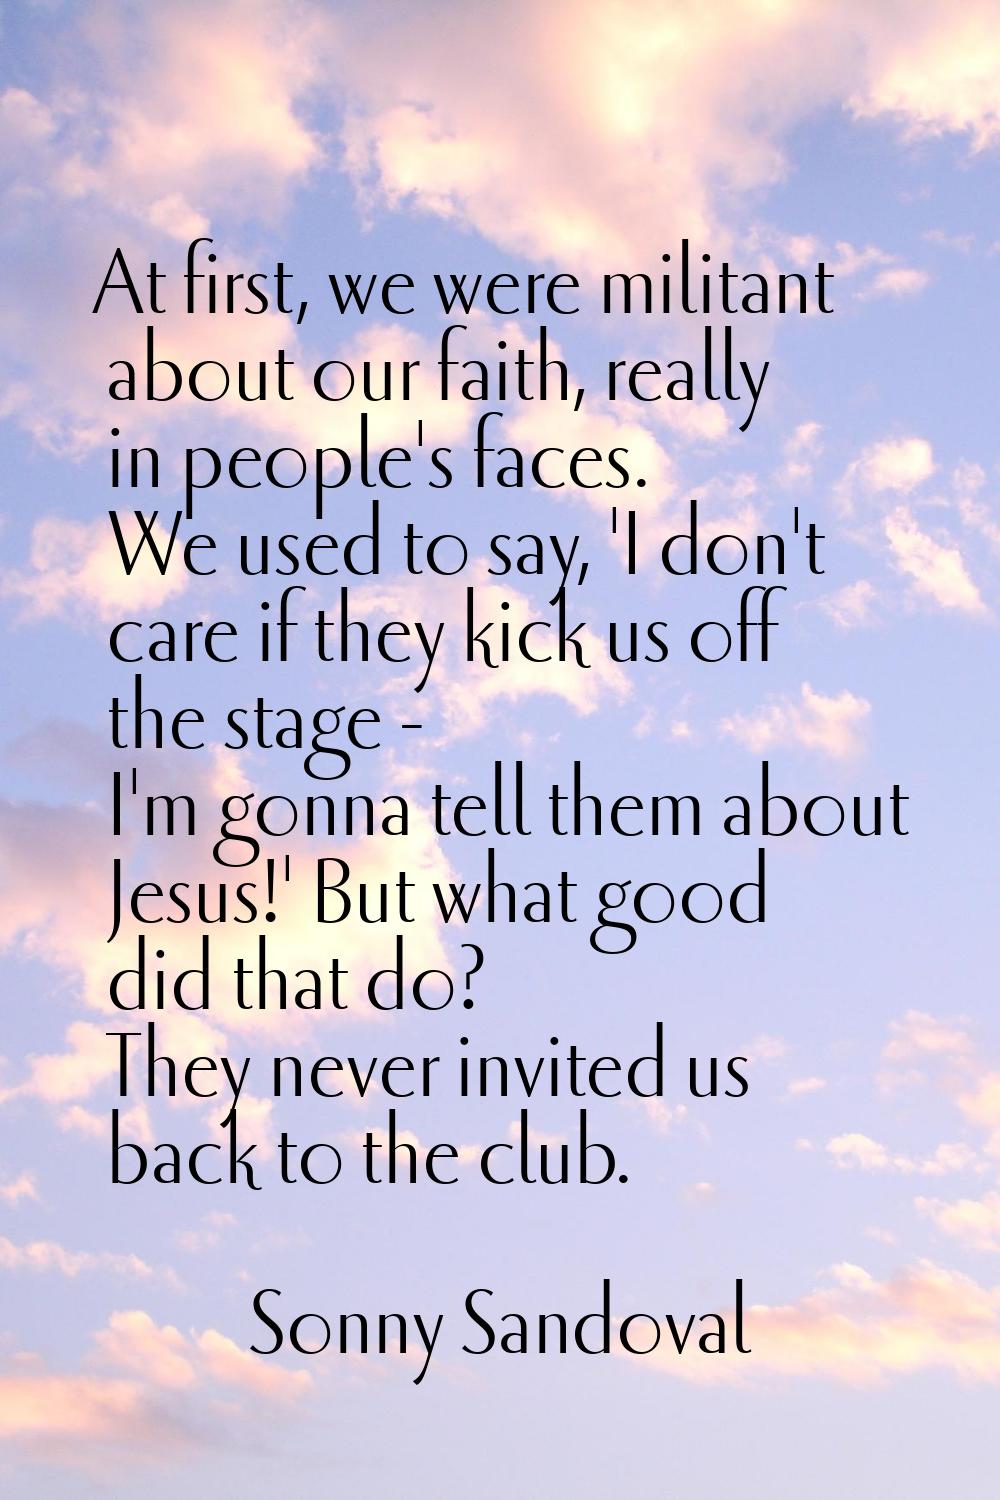 At first, we were militant about our faith, really in people's faces. We used to say, 'I don't care